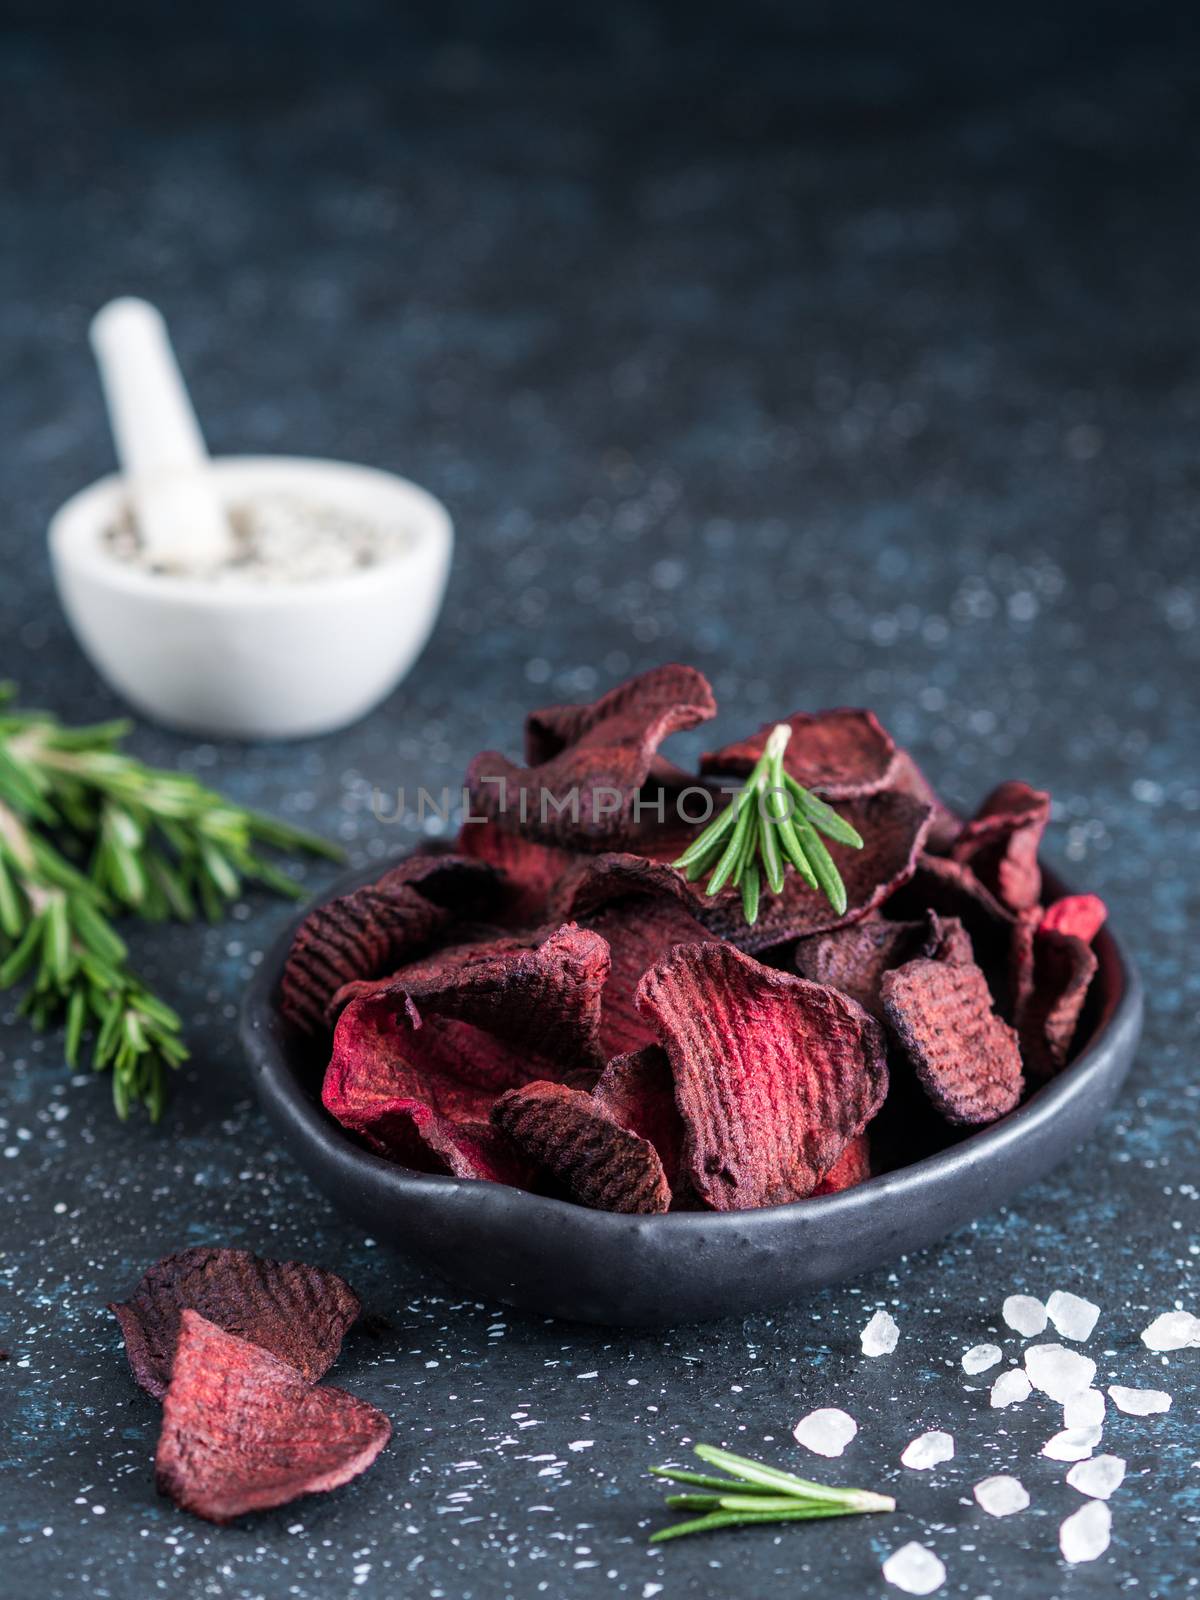 Baked beet slices with coarse sea salt scented rosemary. Vegan diet food idea and recipe. Healthy homemade beetroot chips in plate and ingredients on dark blue background. Copy space